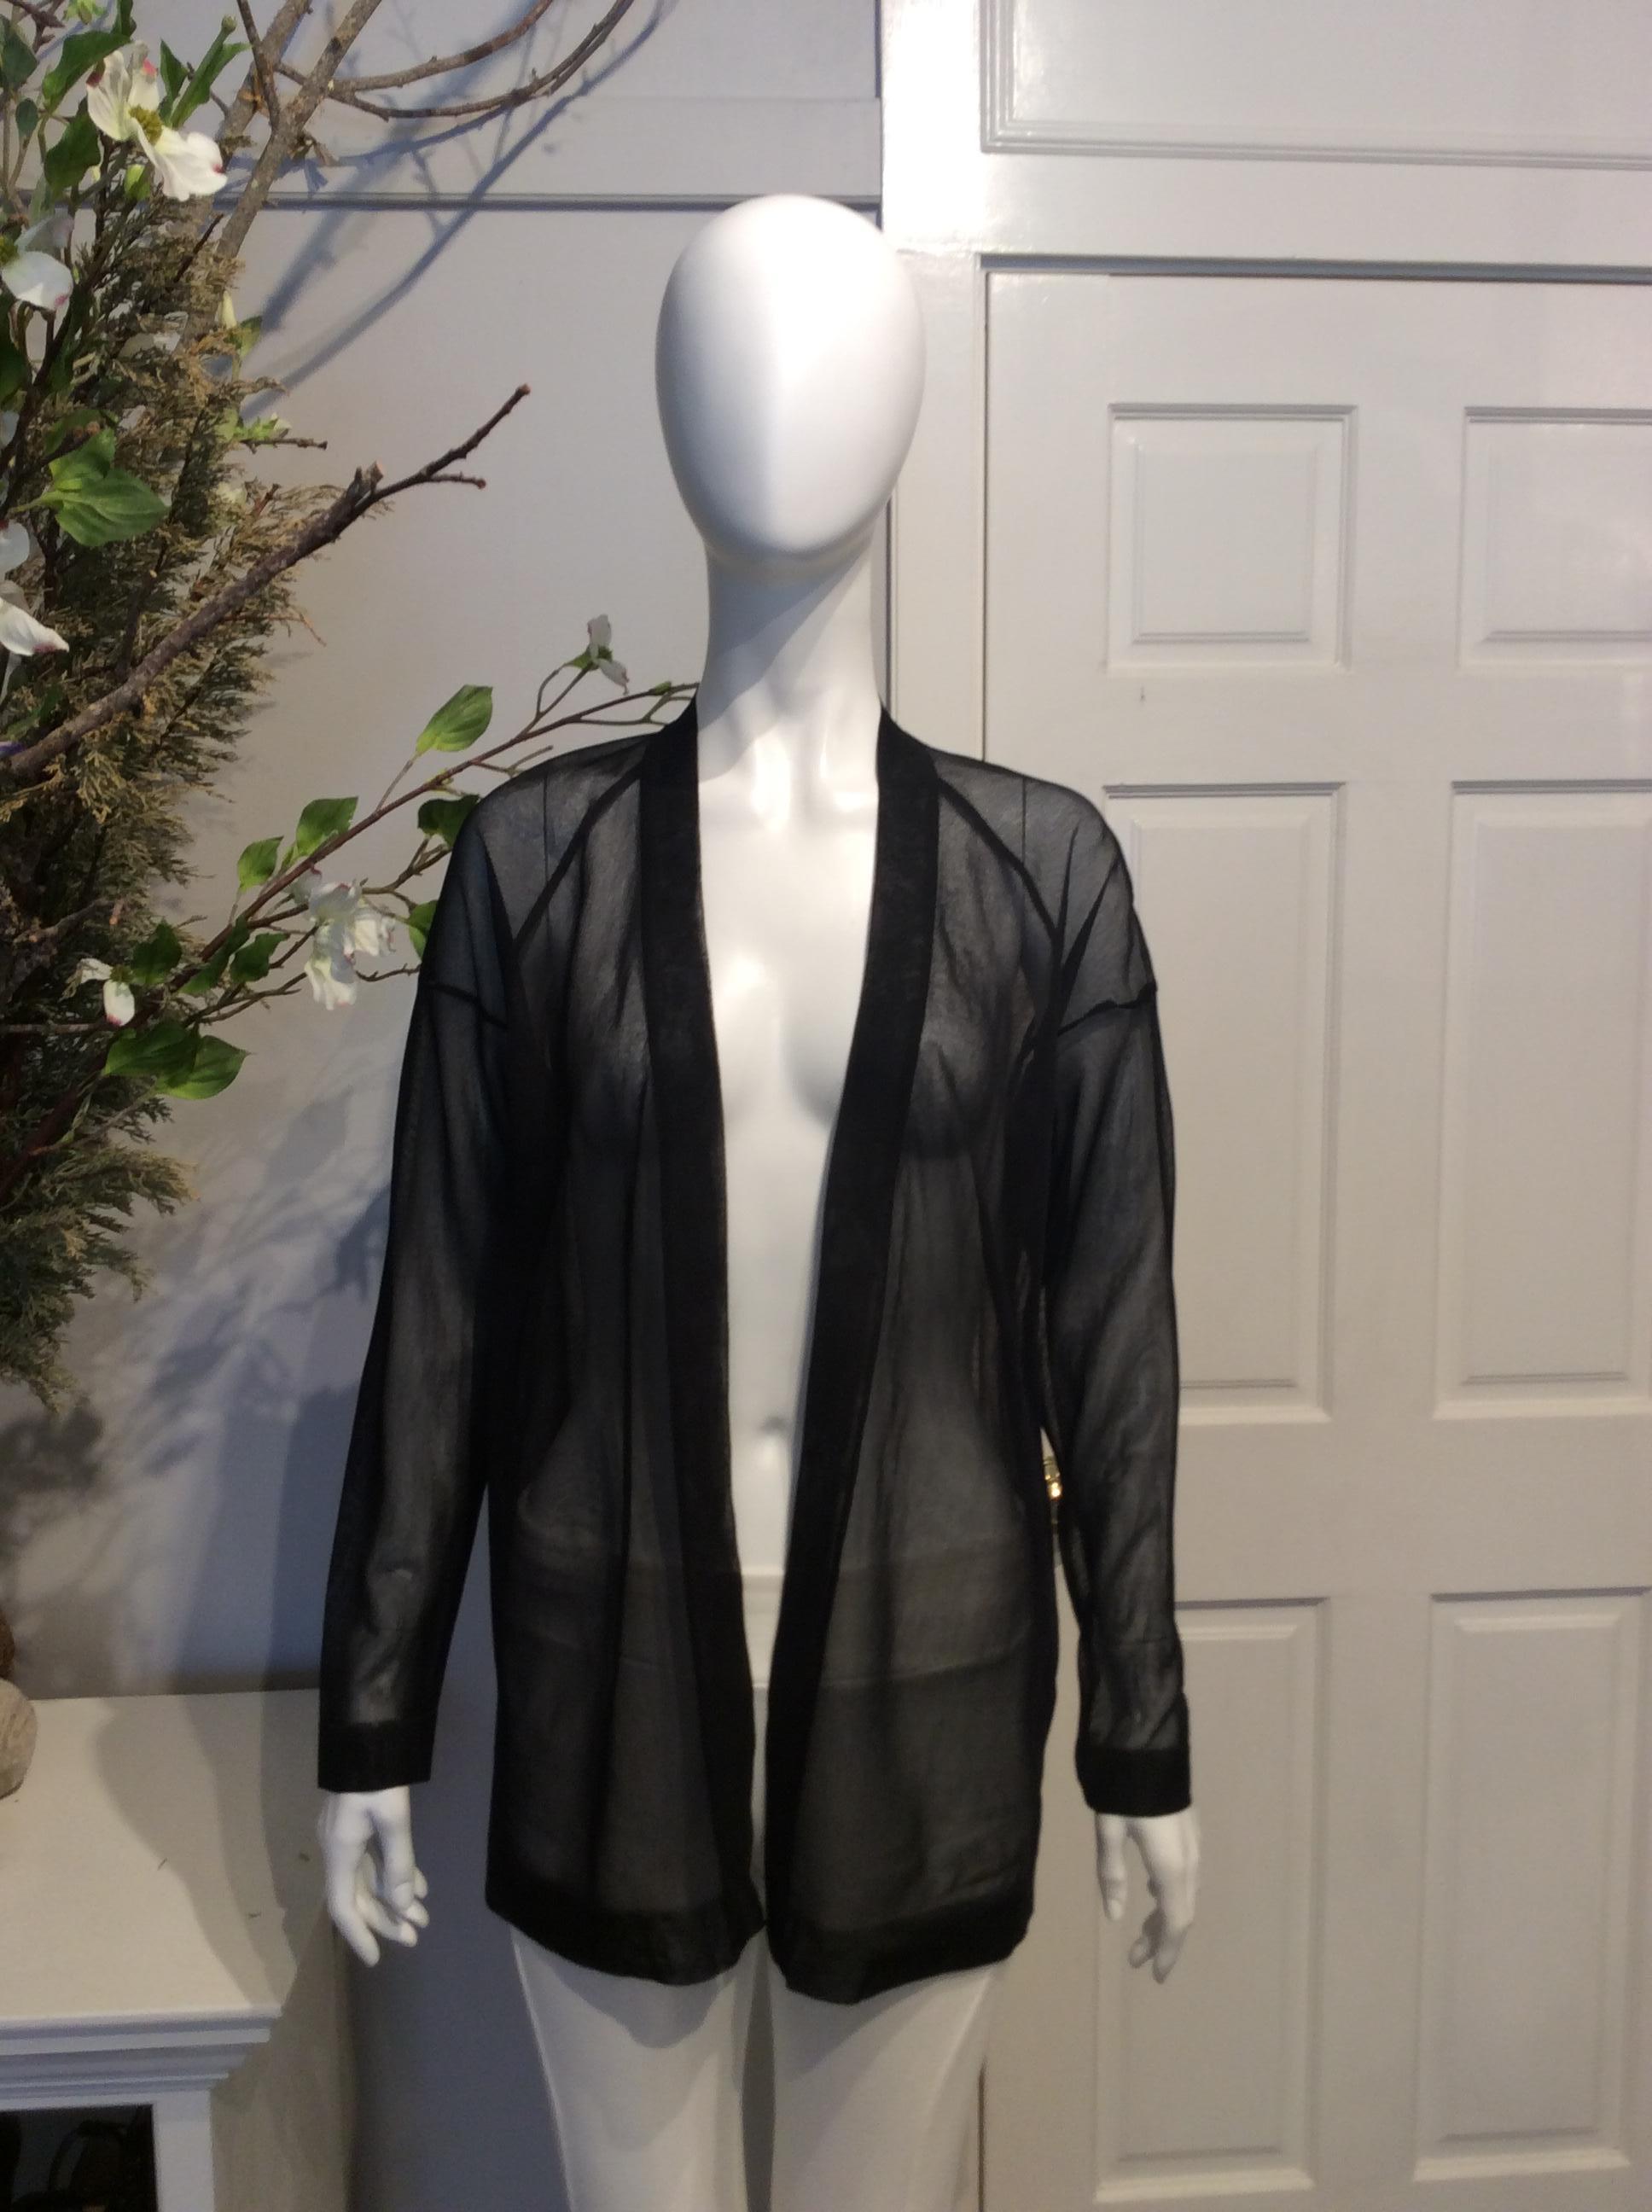 Black Alaia black silk sheer open cardigan. New with tag and never worn. Original retail price of $1565.

Sizing: Fr36, Us4

Fabric content: 100% Silk